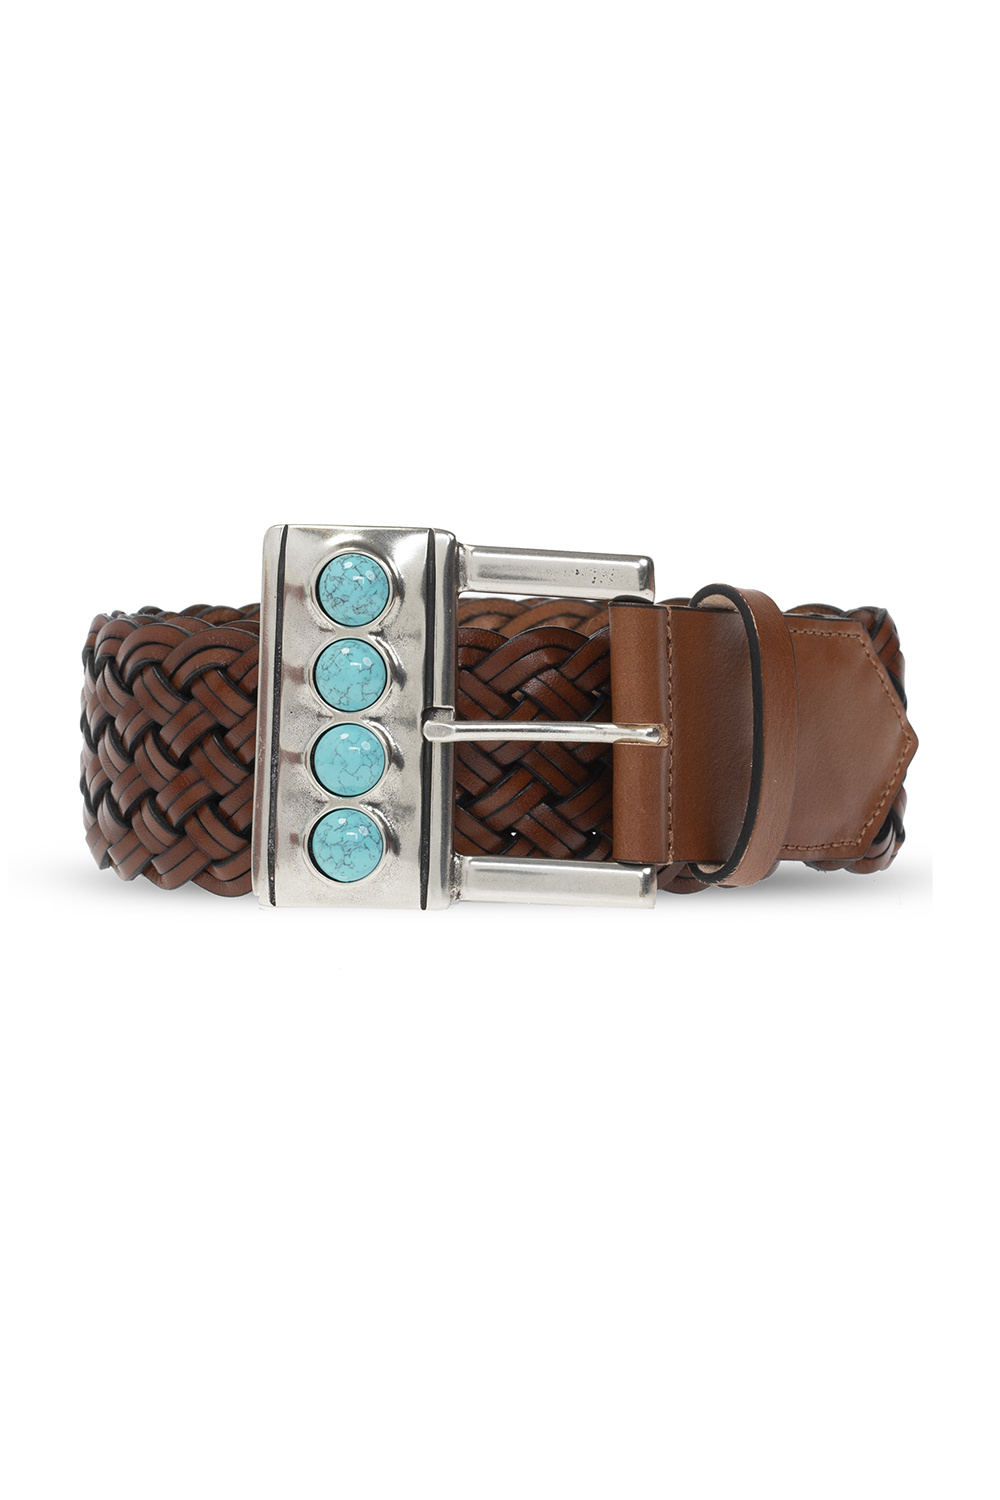 Etro Leather belt from the ‘Crown Me’ collection